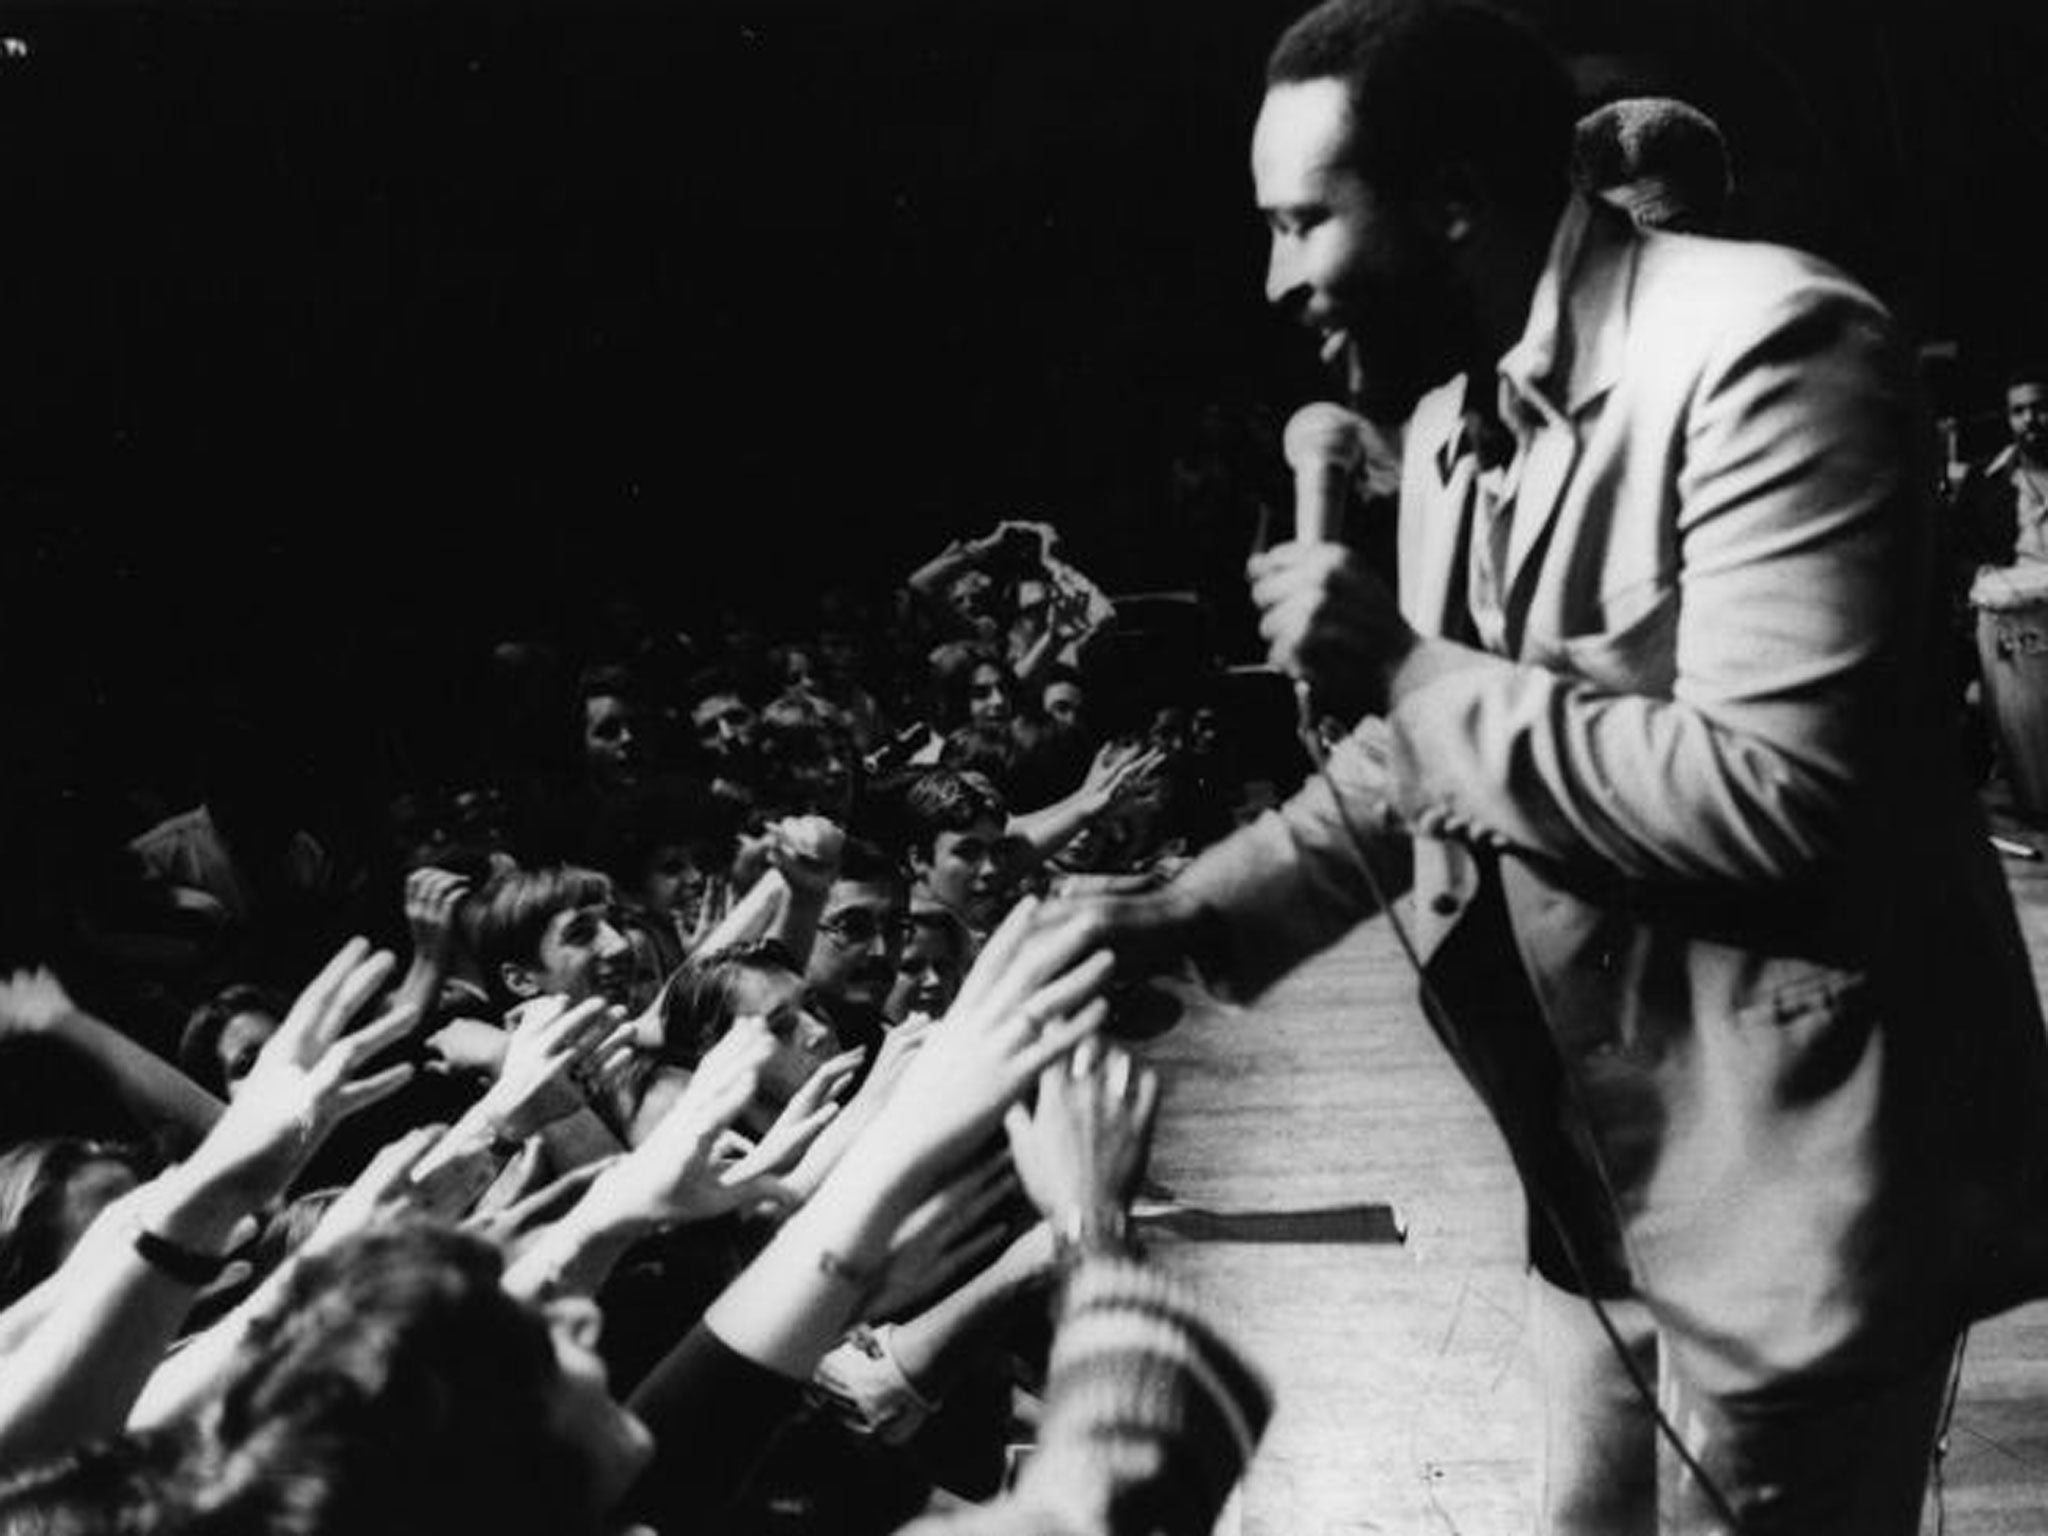 Marvin Gaye songs have been added to Leeds’ playlist